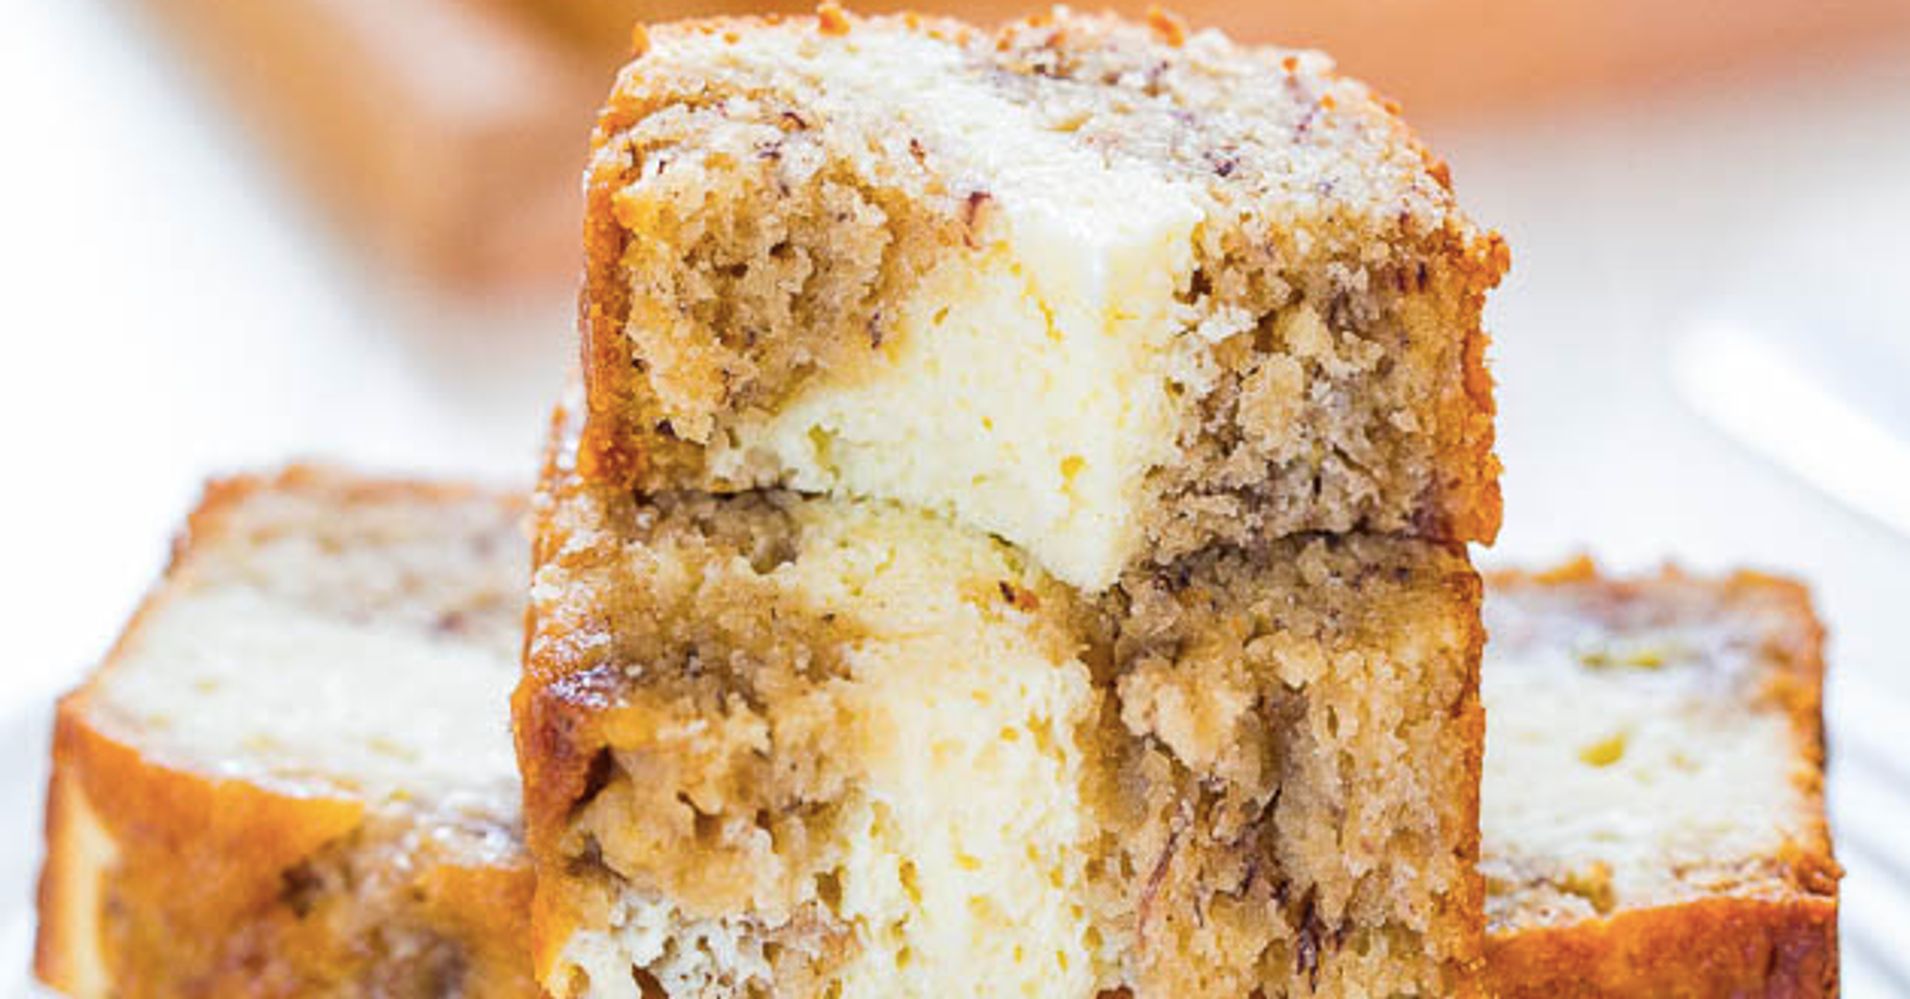 21 Delicious Recipes To Make With Overripe Bananas | HuffPost